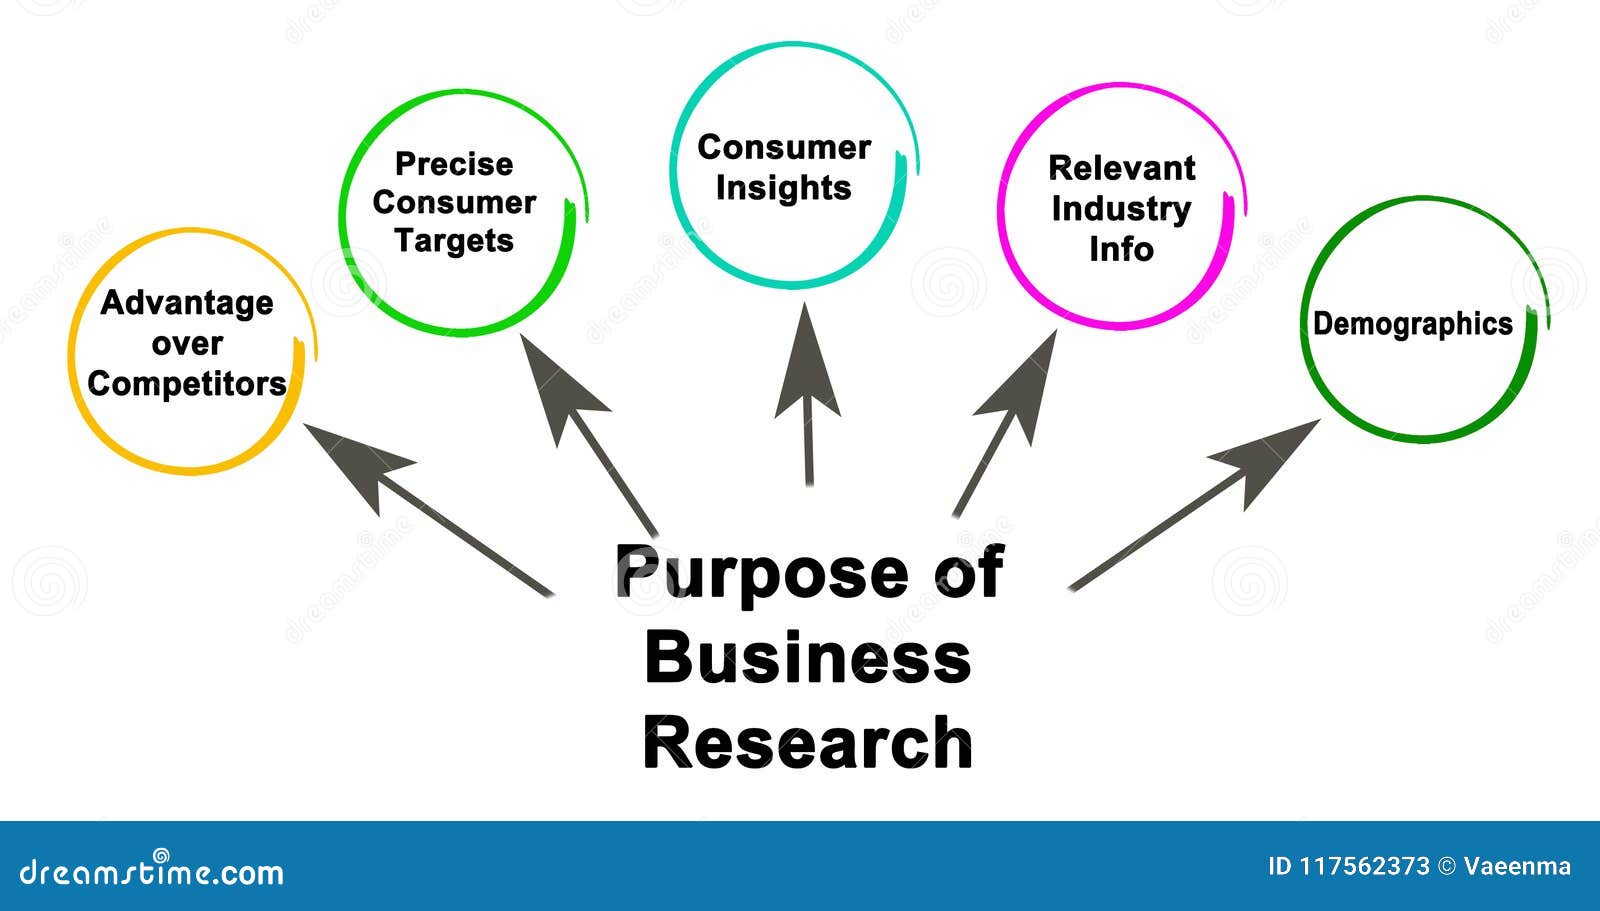 what is the purpose of business research